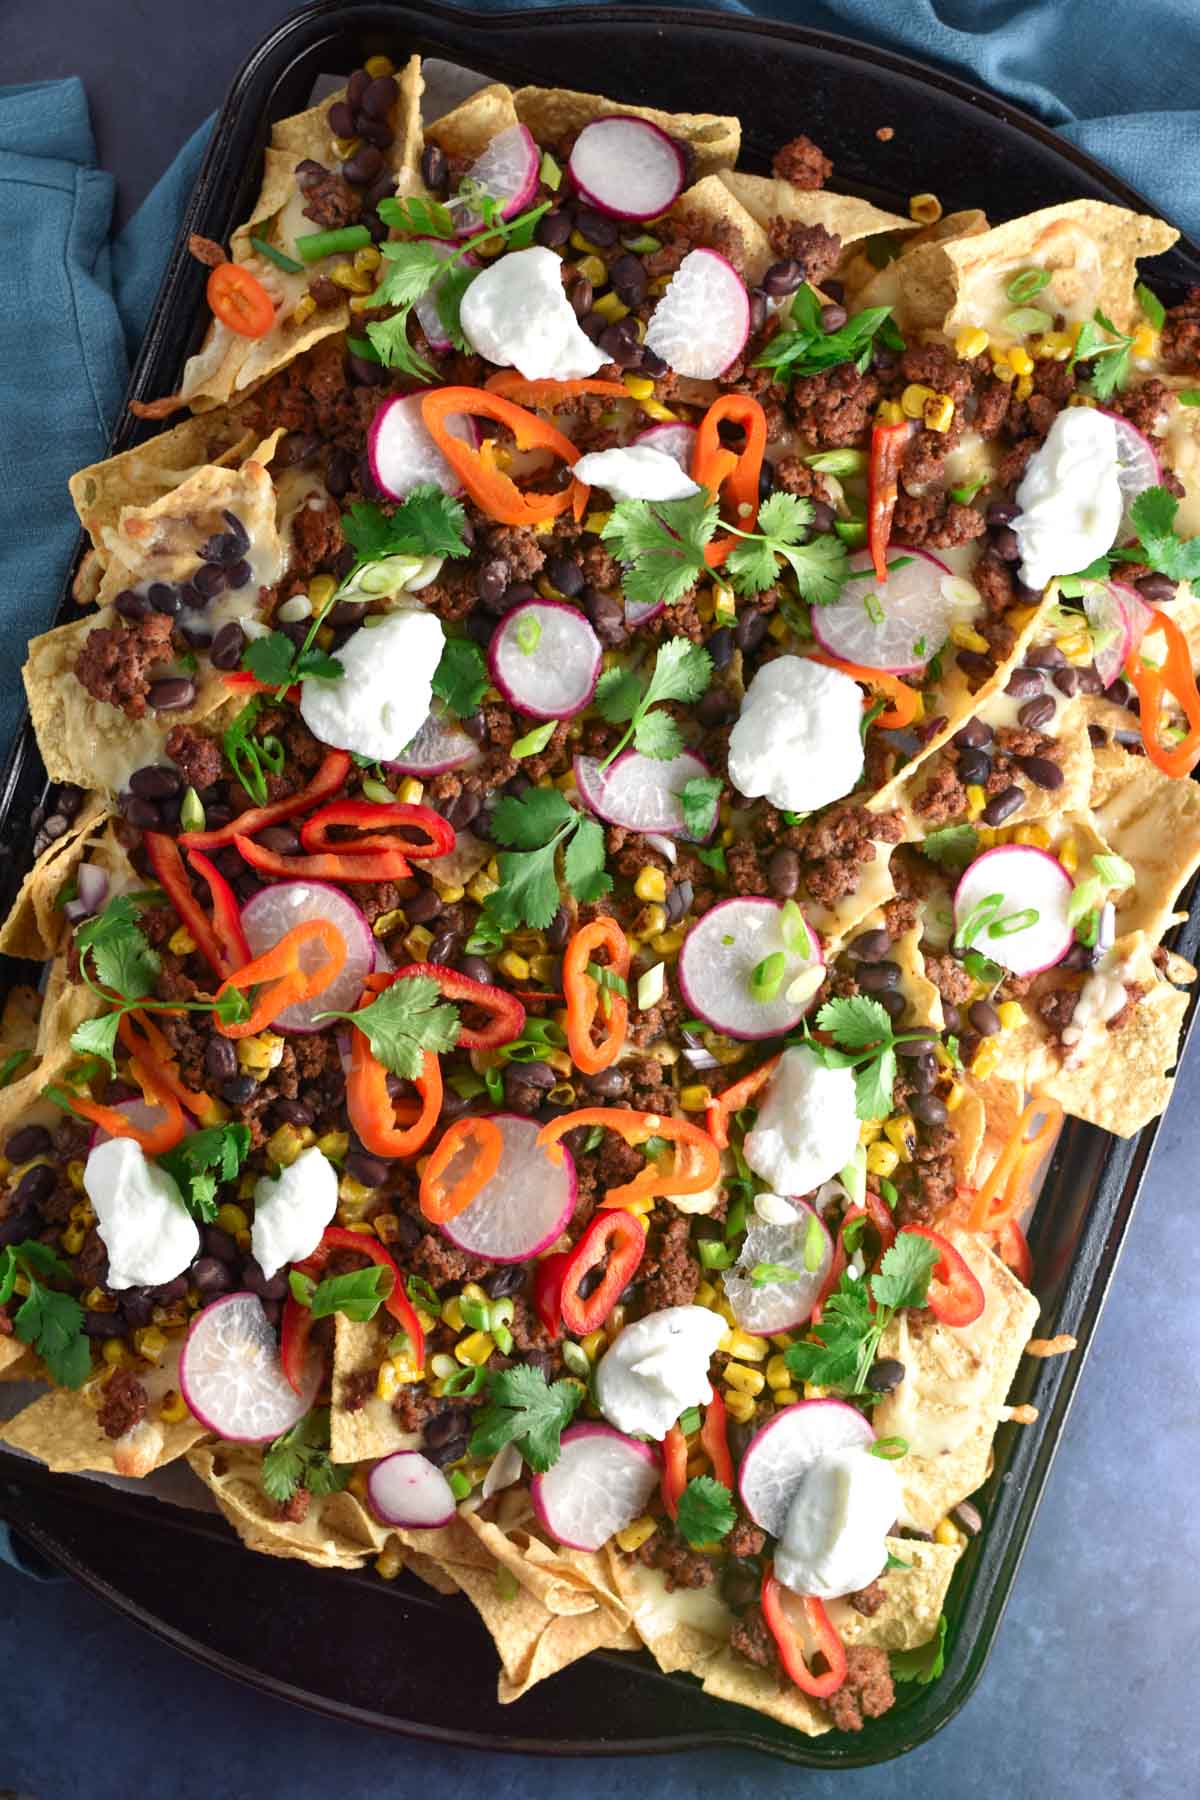 This is an image of ground beef nachos from The Dizzy Cook.